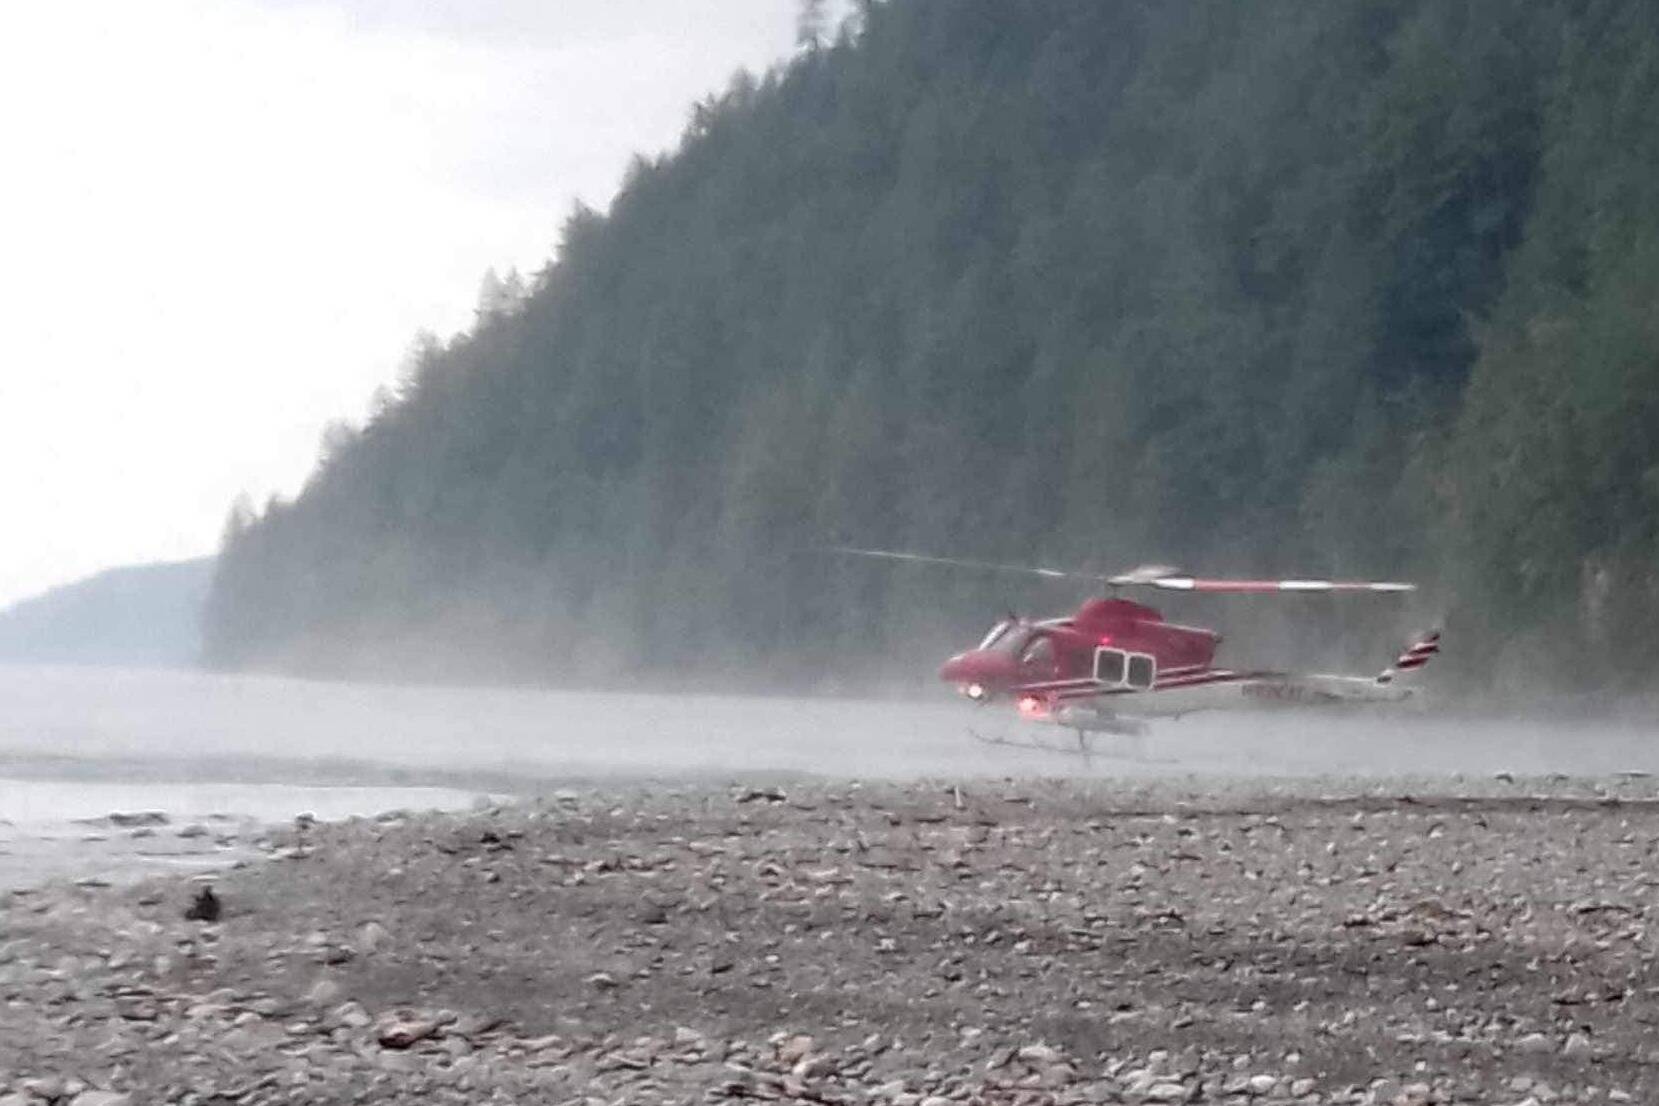 A B.C. Wildfire Service helicopter lands near Cogburn Creek. Multiple wildfires were discovered this week in the Harrison Hot Springs-Harrison Lake area, most of which were caused by lightning from passing thunderstorms. (Photo/Harrison Adventure RVing)